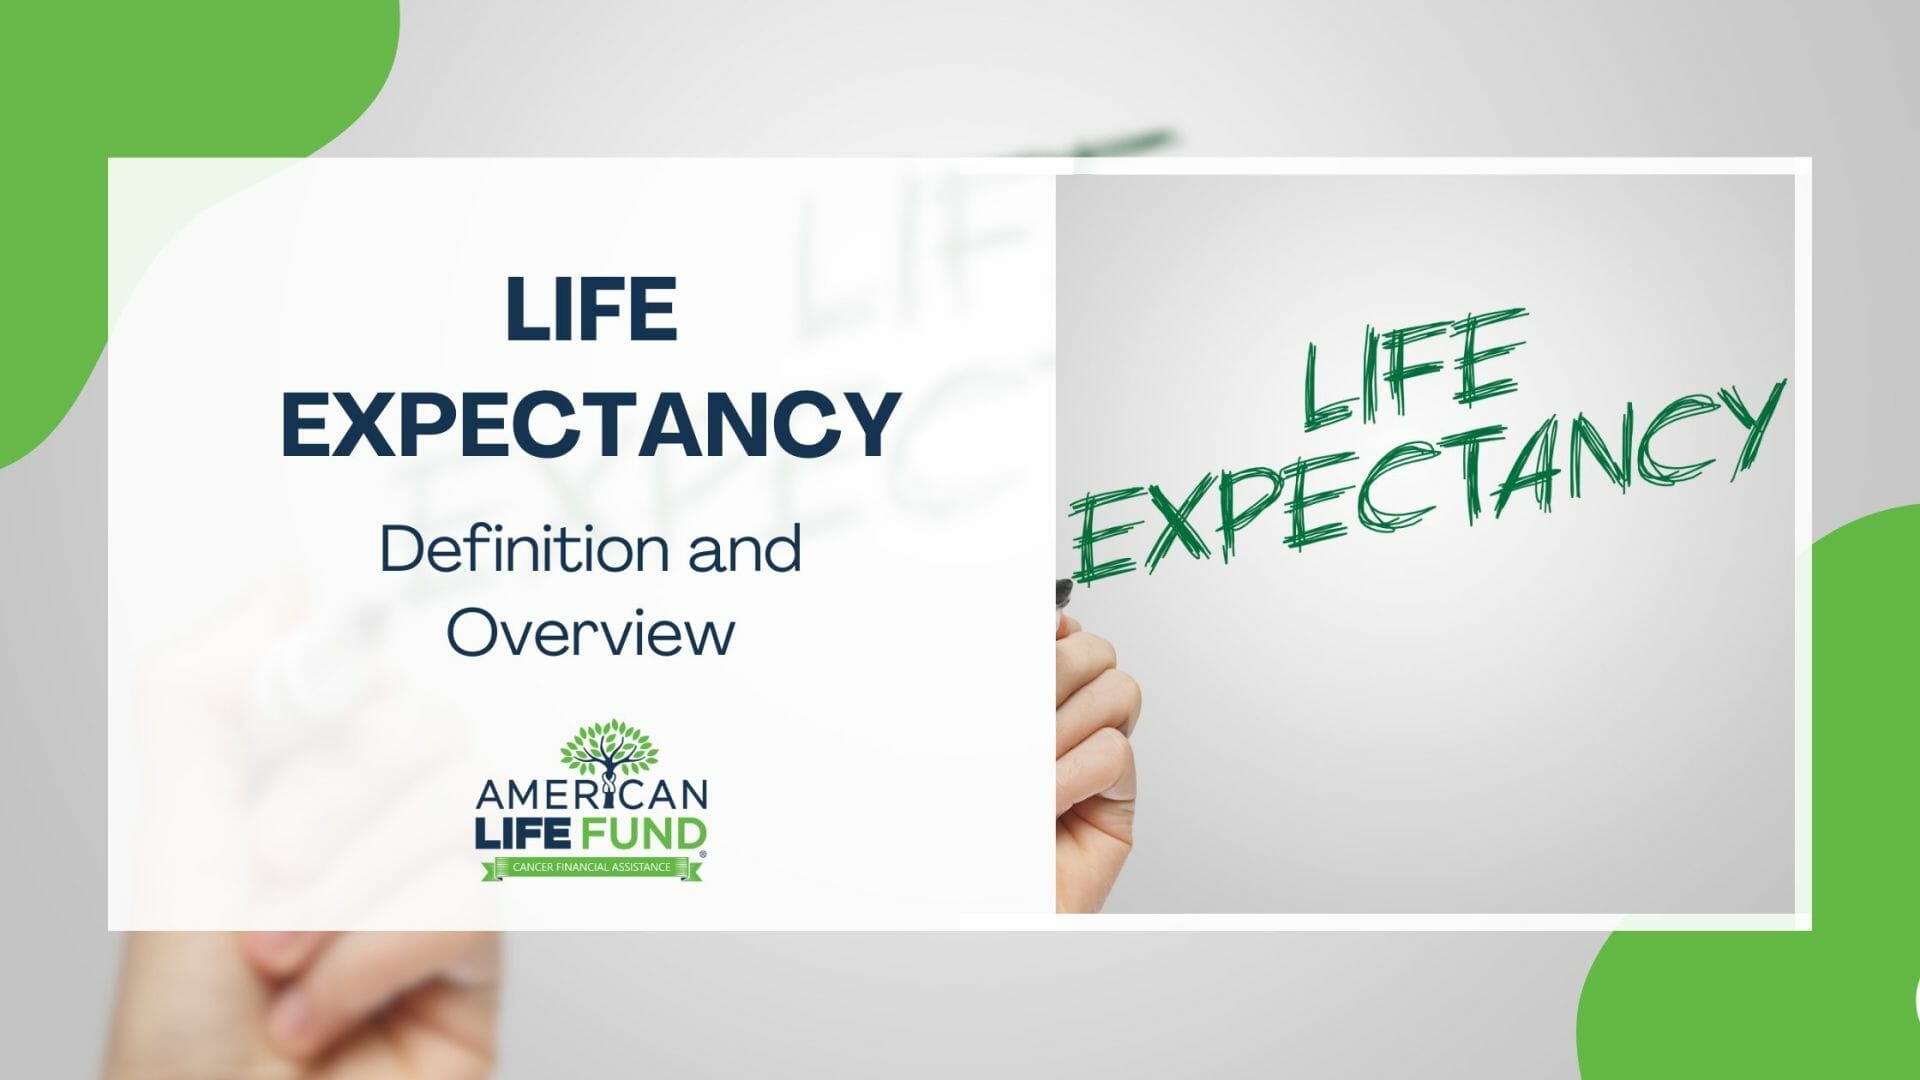 Blog feature image with hand holding a pen writing a life expectancy with a caption of life expectancy definition and overview